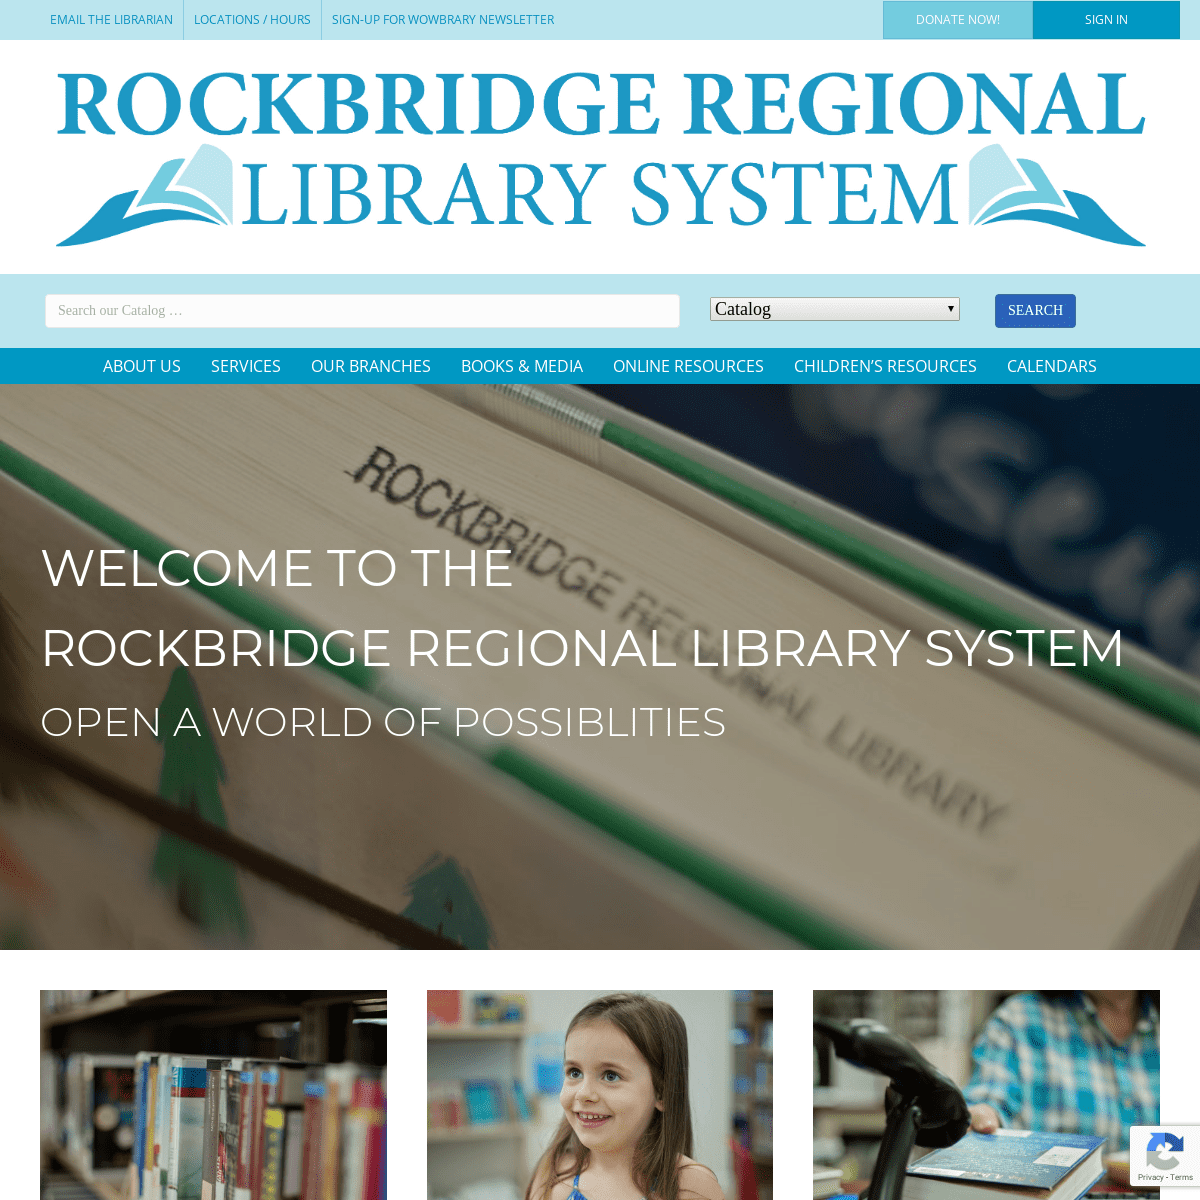 Welcome to the Rockbridge Regional Library System